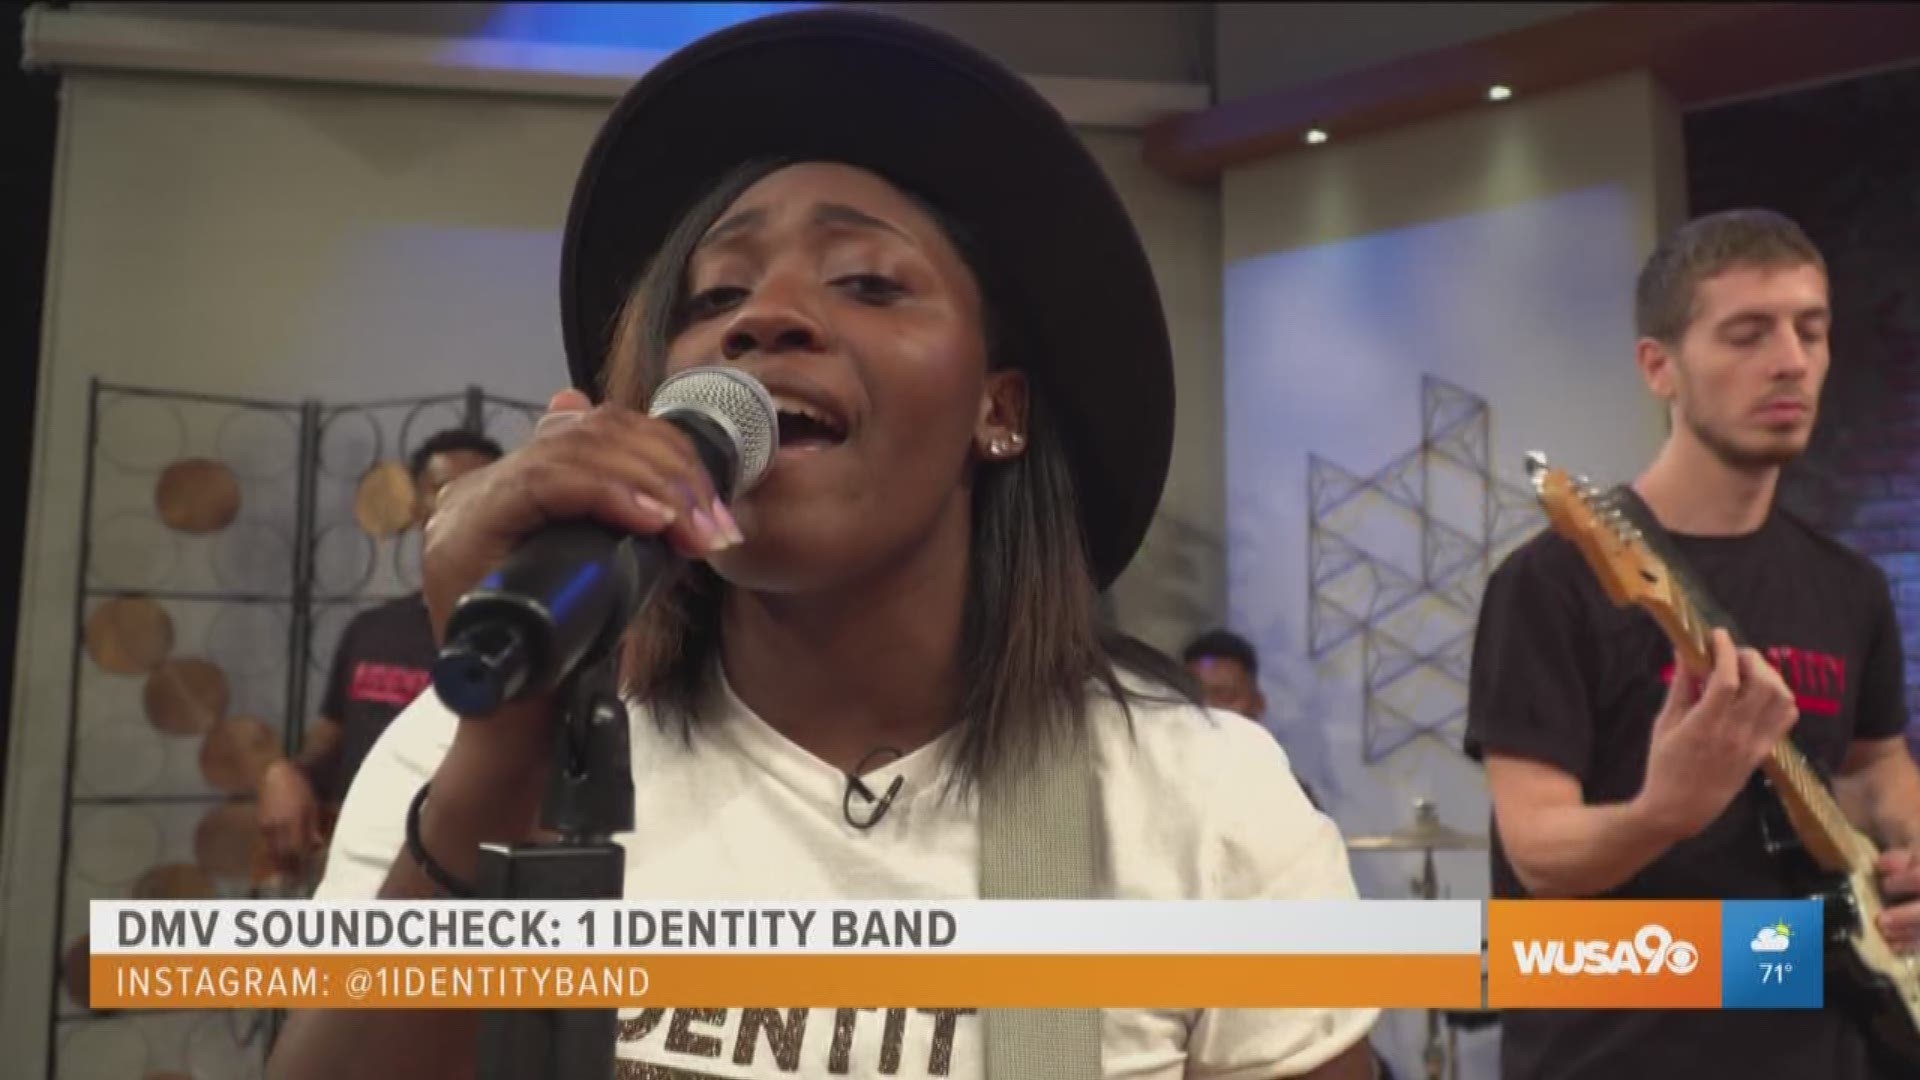 For this week's DMV Soundcheck performance, 1 Identity band performed their latest single "In Your Feelings".  This segment was sponsored by the DC OCTFME.